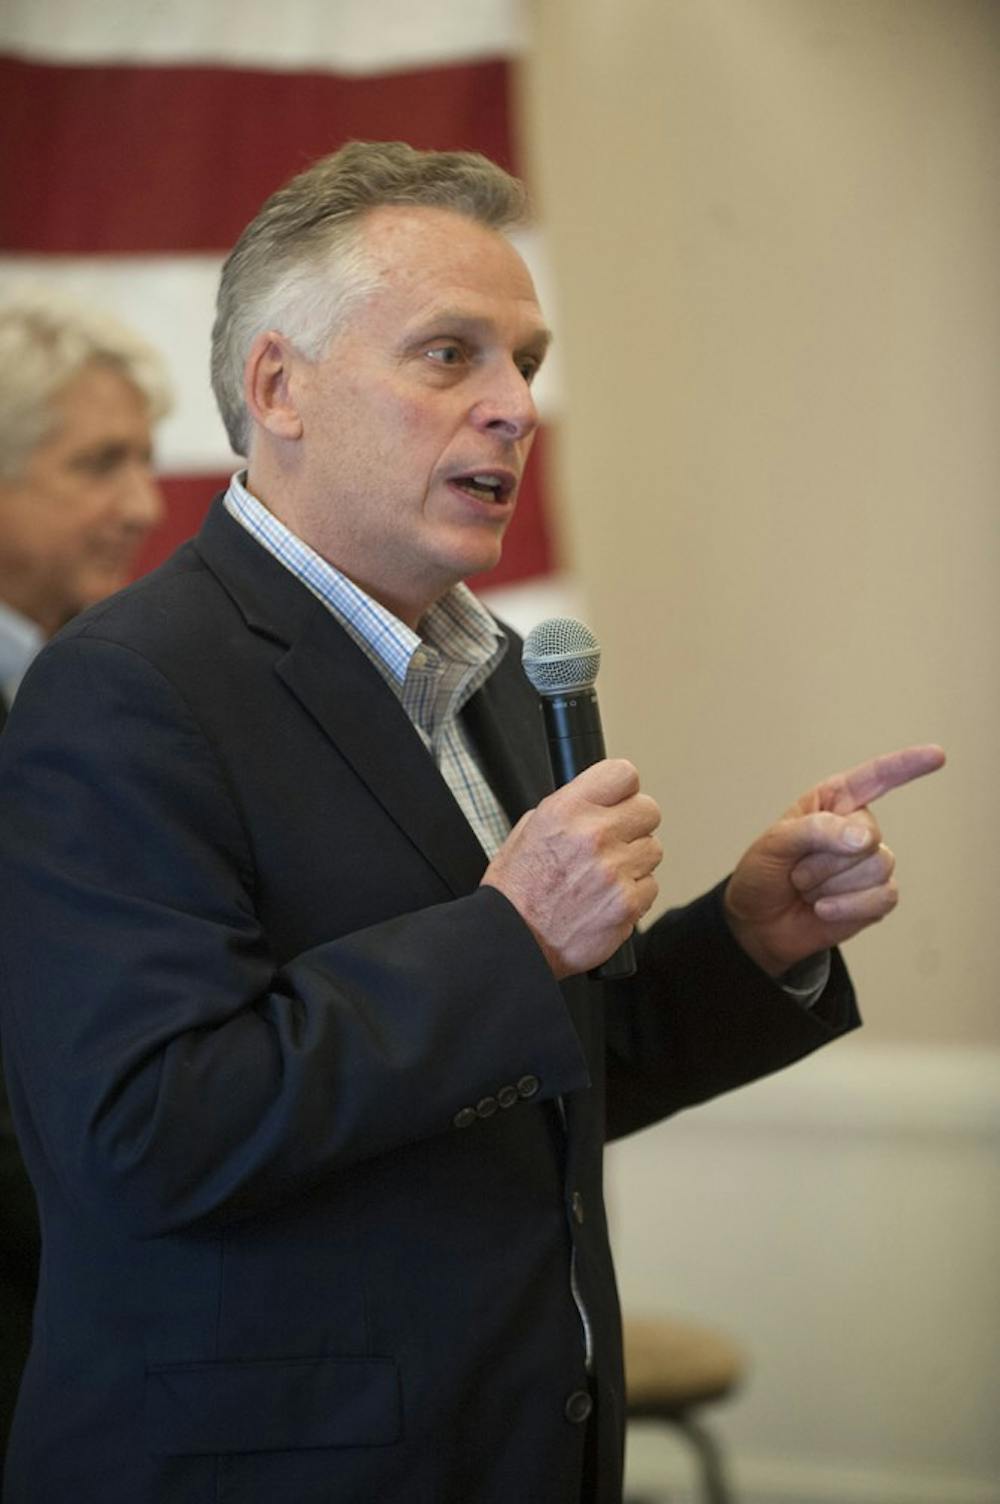 <p>Rachel Thomas, press secretary for McAuliffe, said the Governor values the work the task force has done and will fully consider their recommendations.</p>